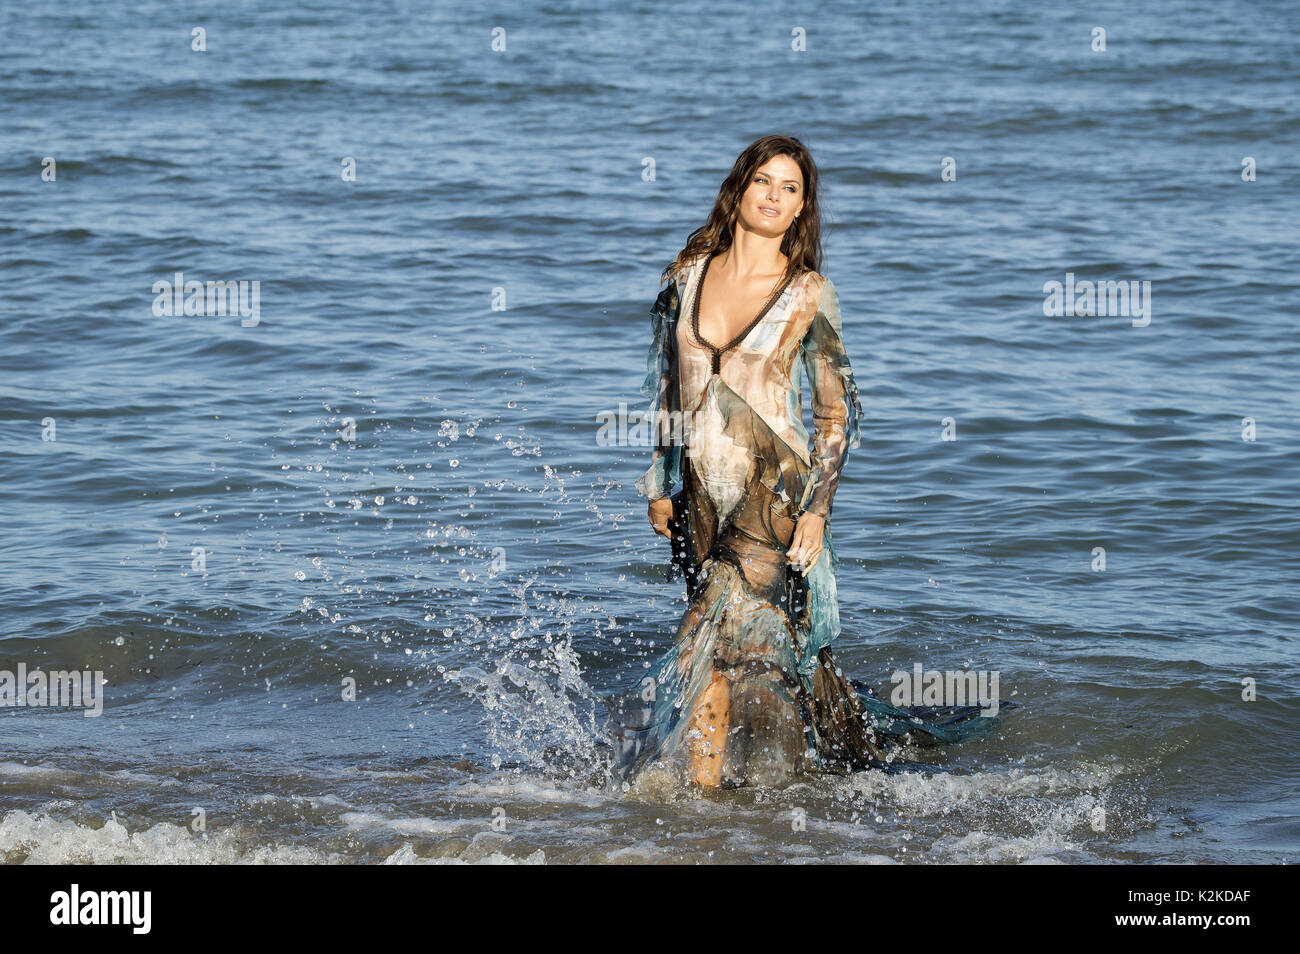 Isabeli Fontana during a photocall ahead of the 74th Venice Film Festival 2017 on August 29, 2017 in Venice, Italy. | usage worldwide Stock Photo